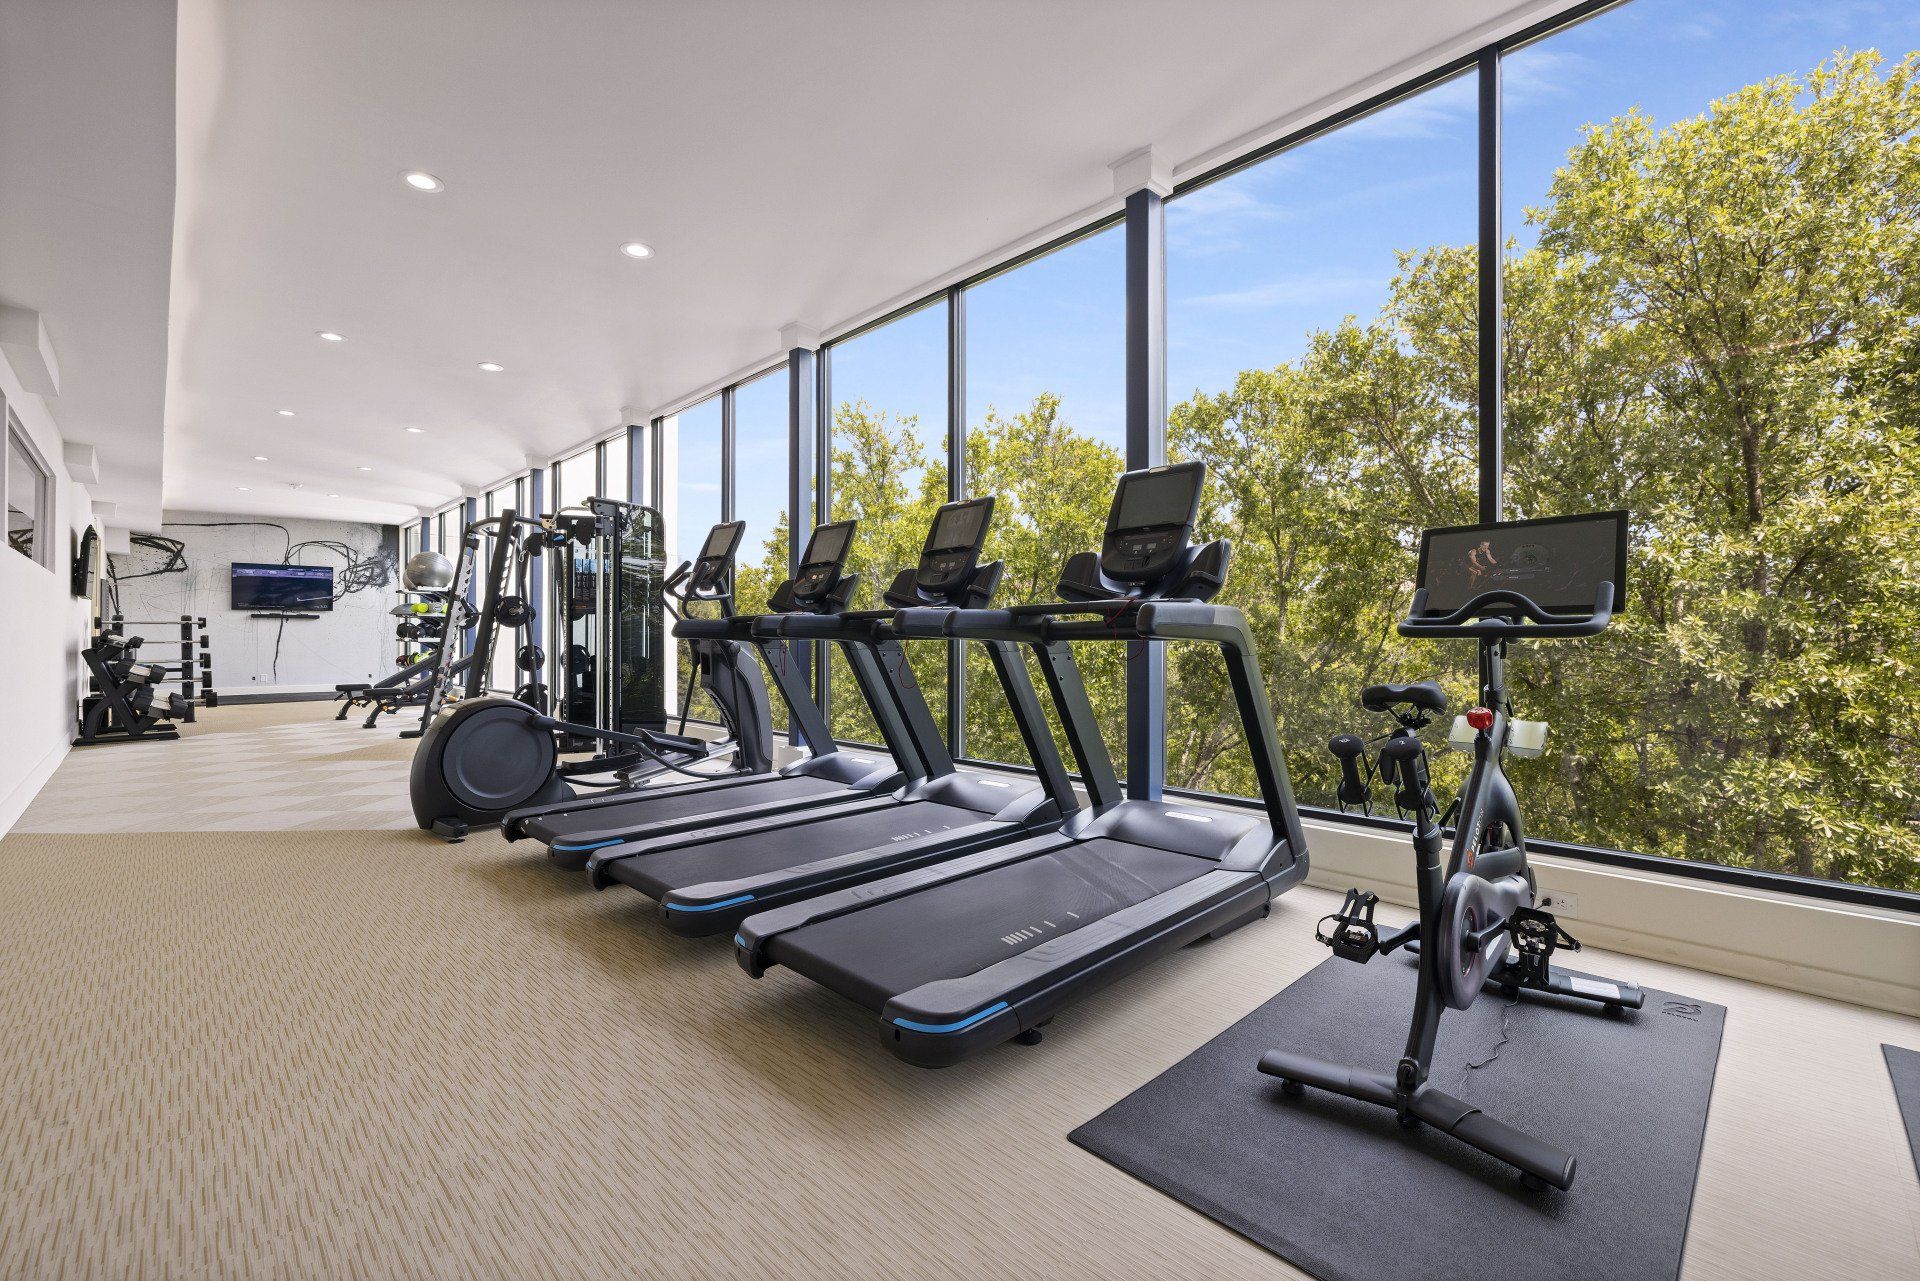 Fitness Center at Ilion Apartments.